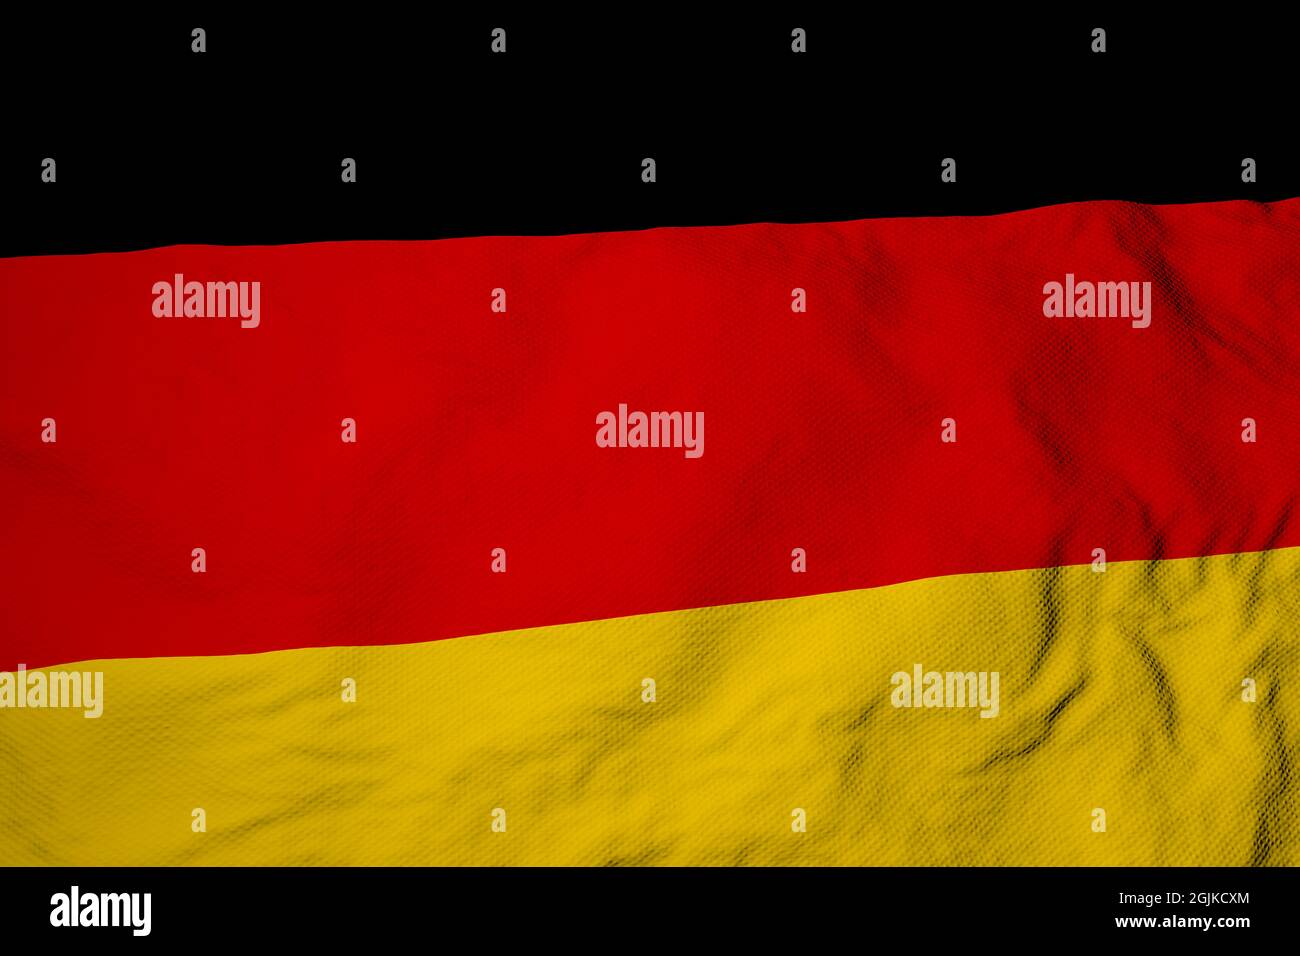 Full frame close-up on a waving German flag in 3D rendering. Stock Photo